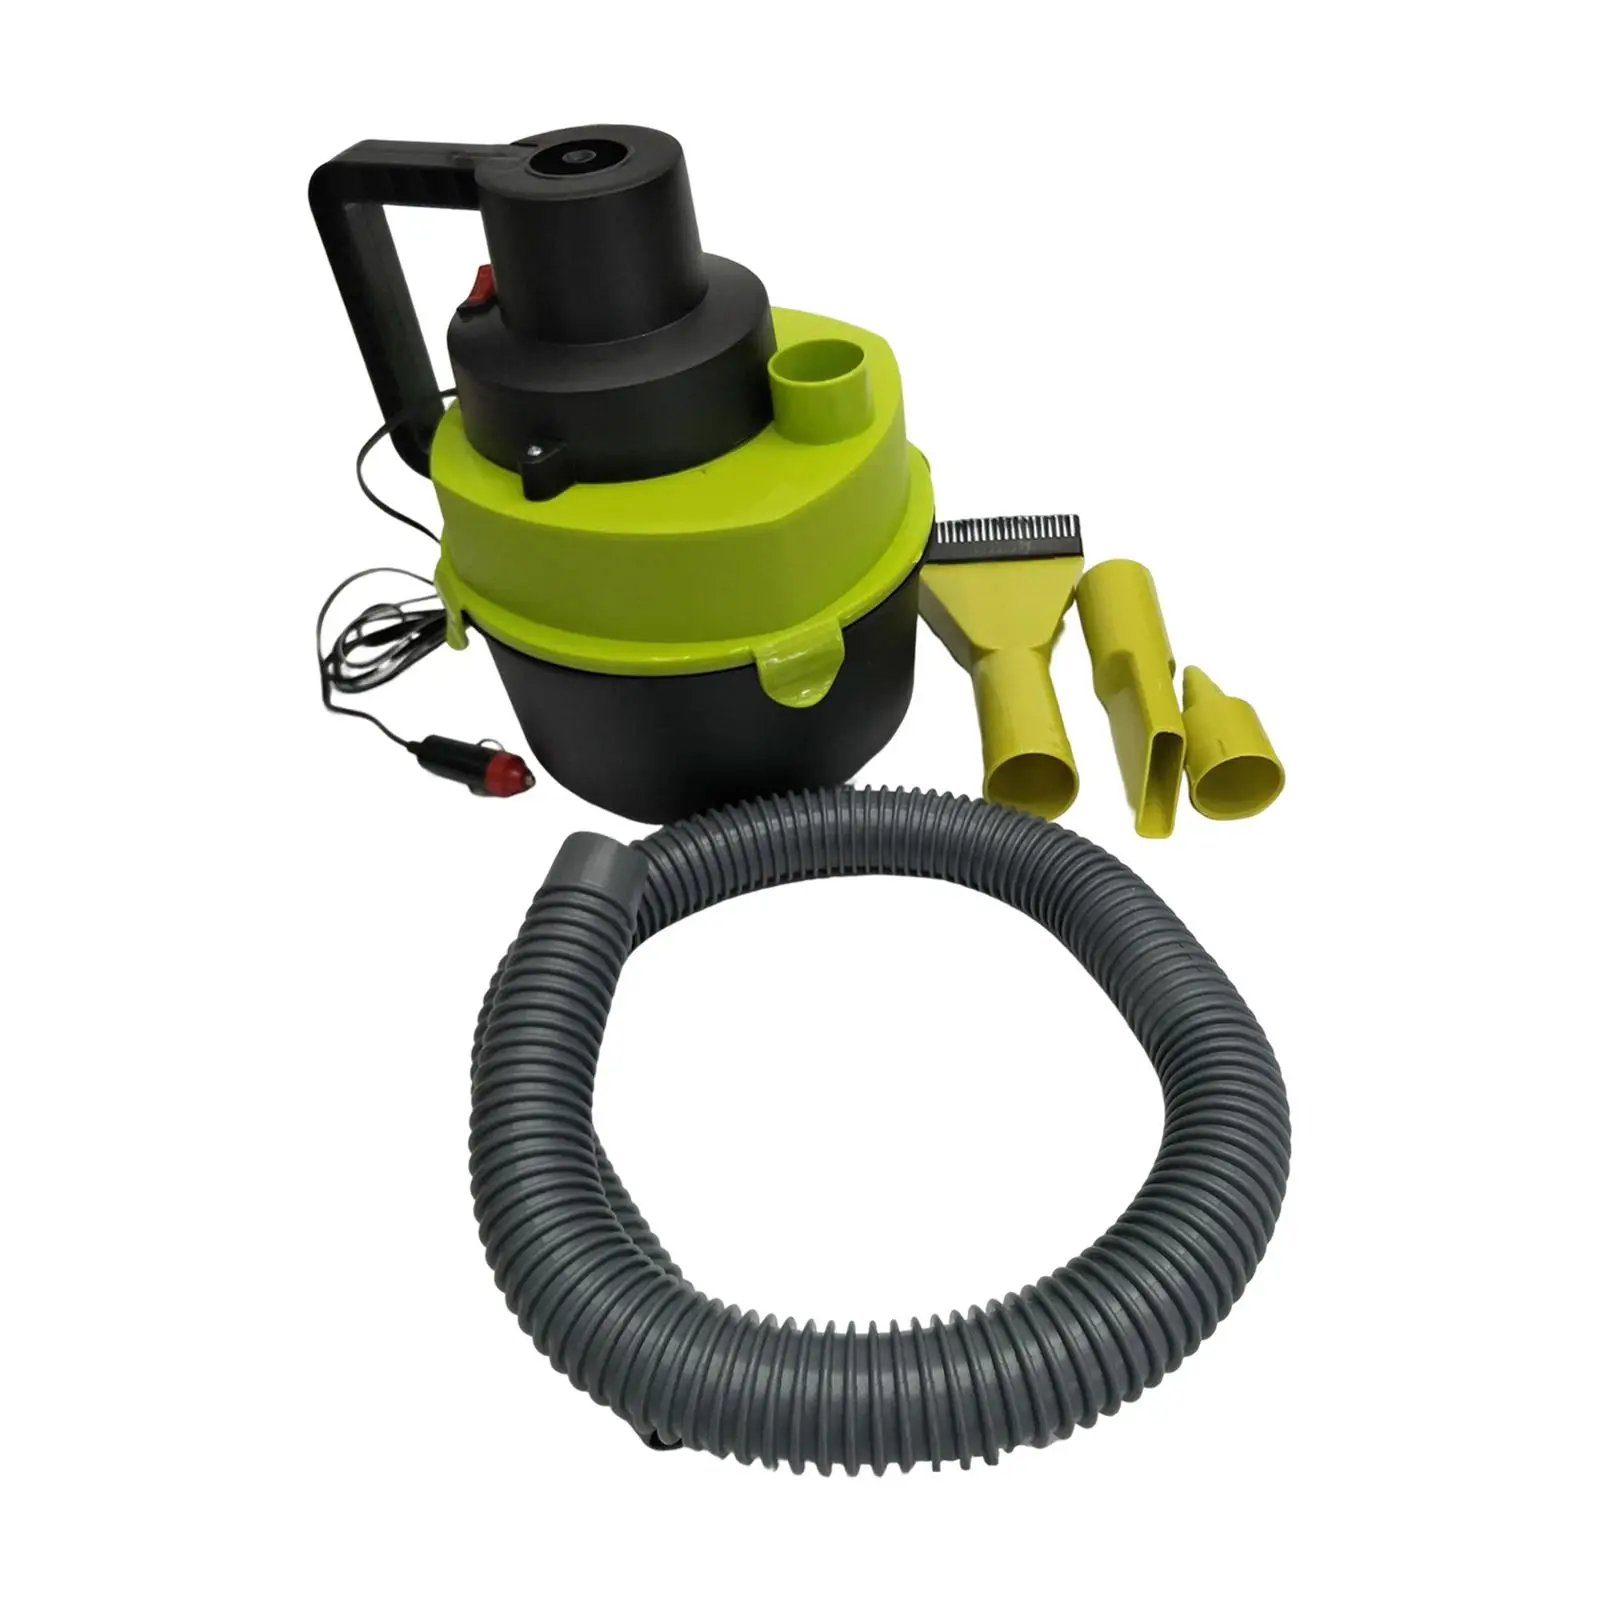 dry wet Vacuum Portable Shop Vacuum with Attachments for home Basement